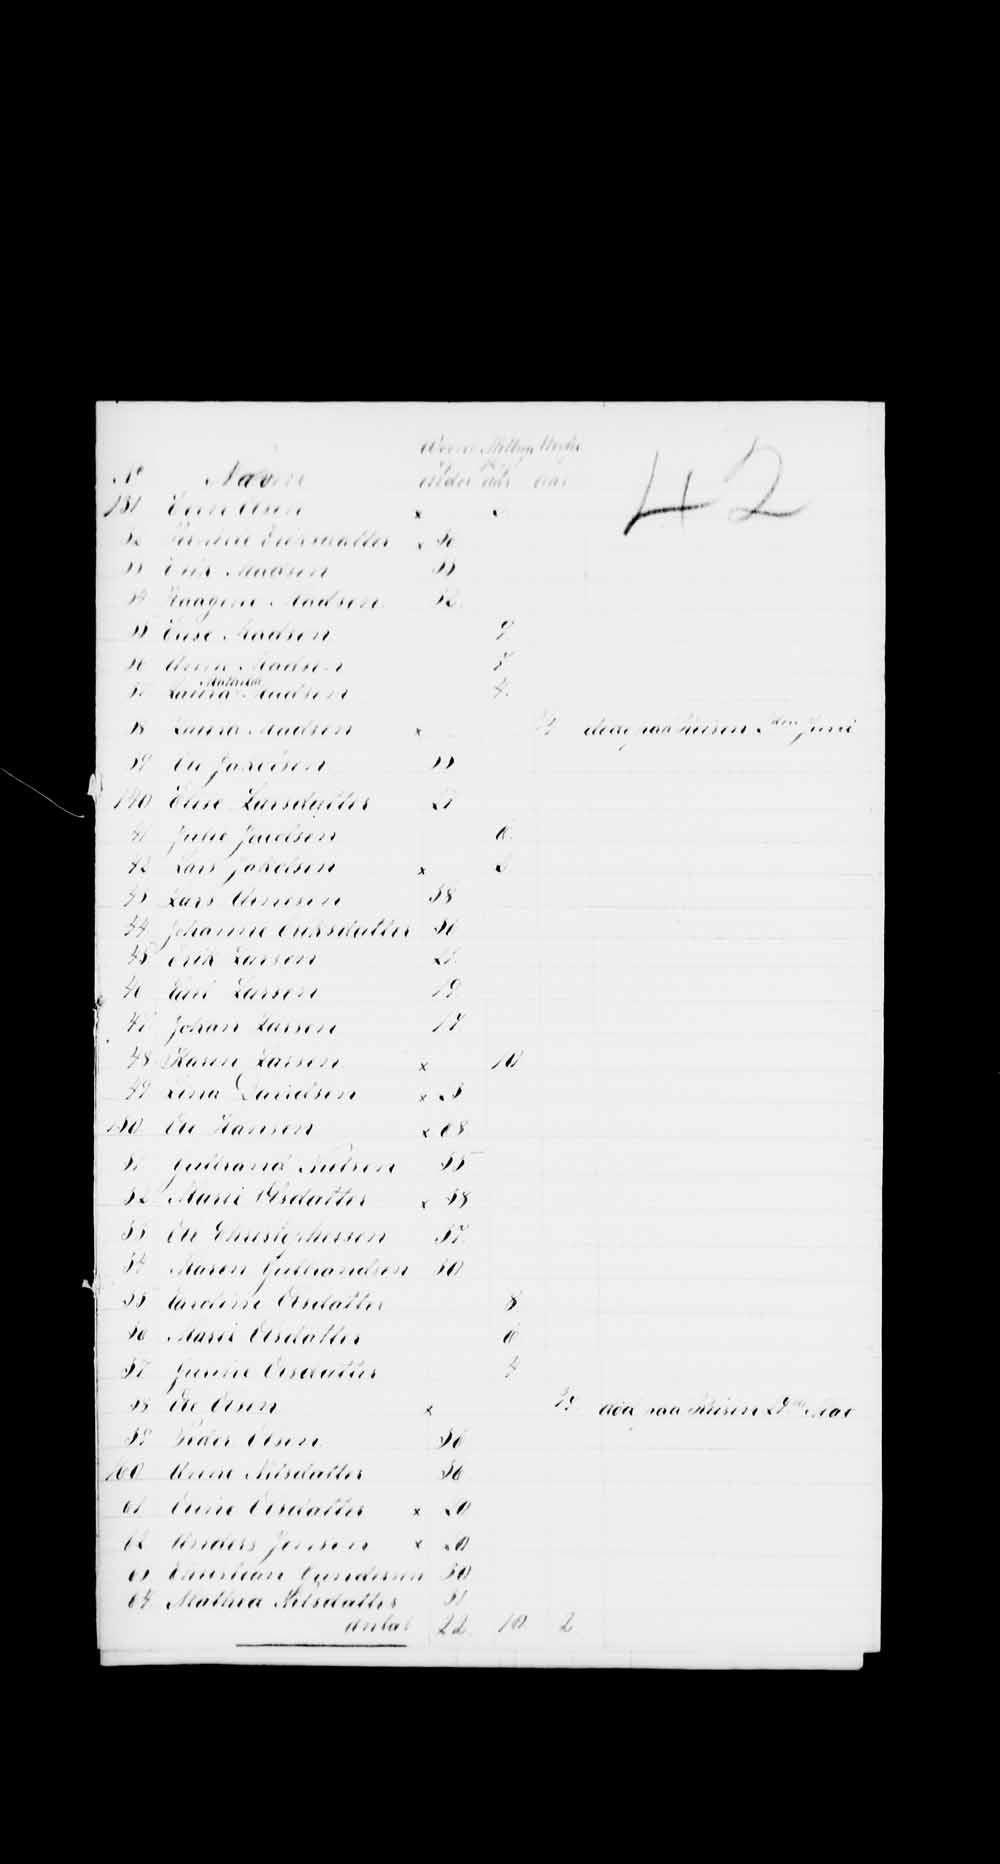 Digitized page of Passenger Lists for Image No.: e003530329